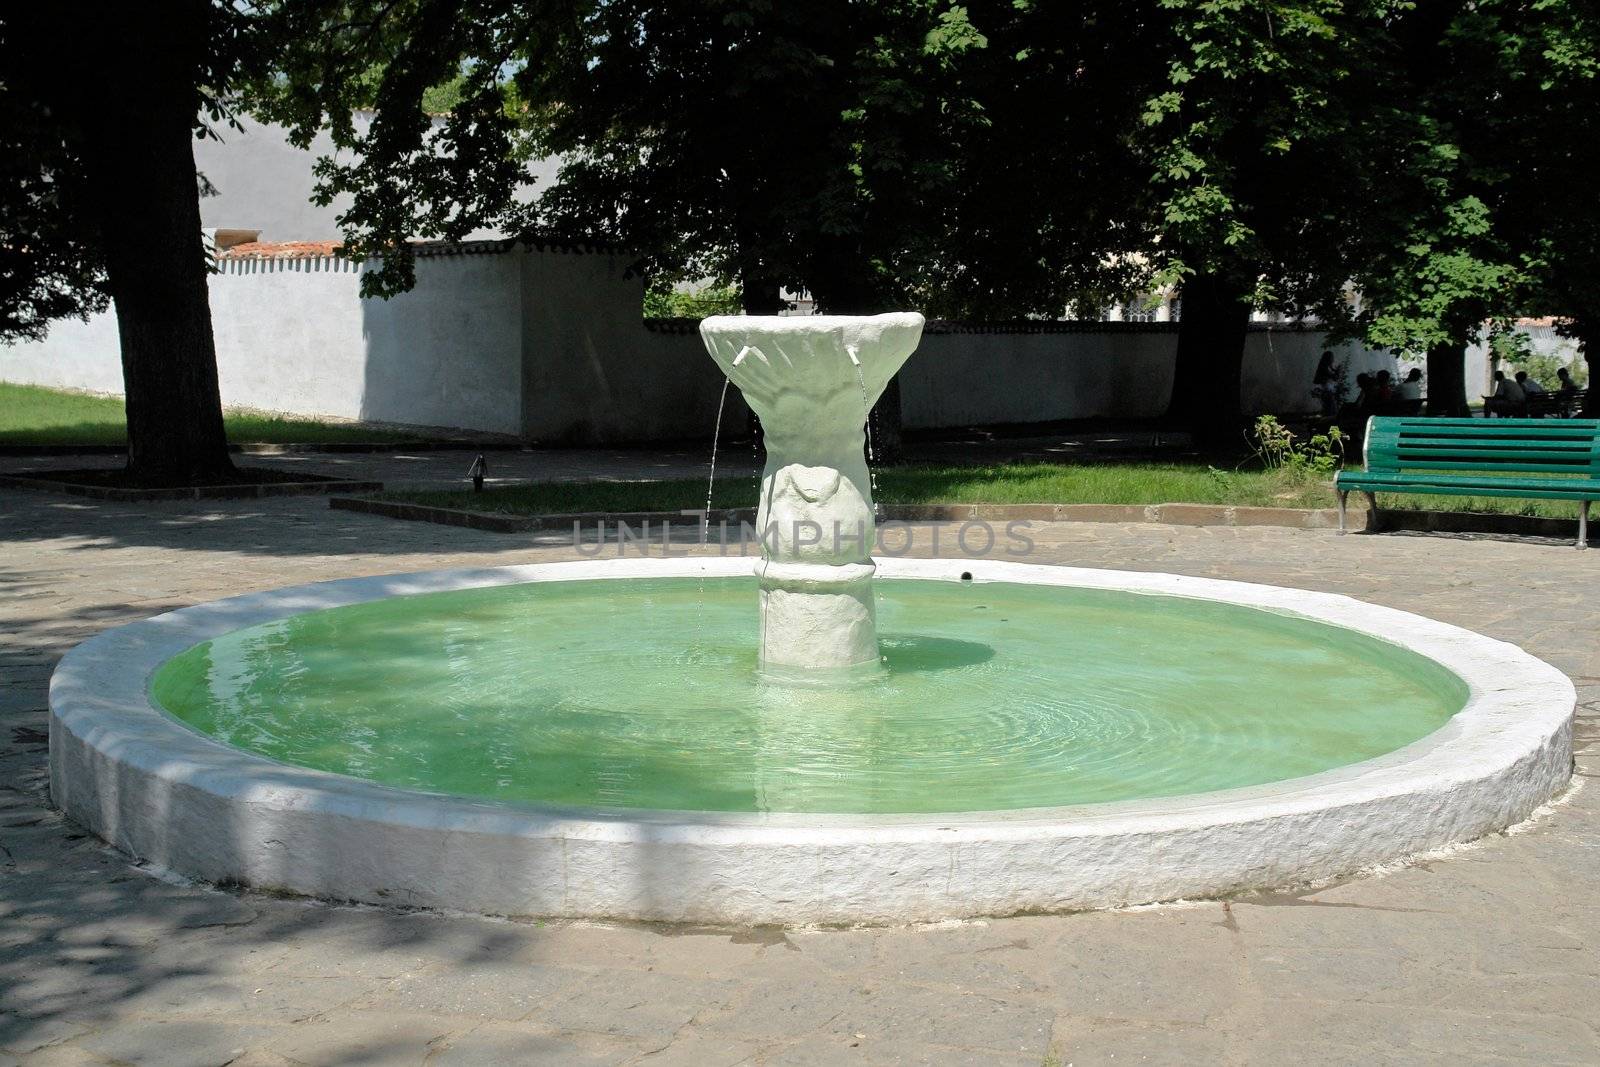 Small fountain with thin jets of water